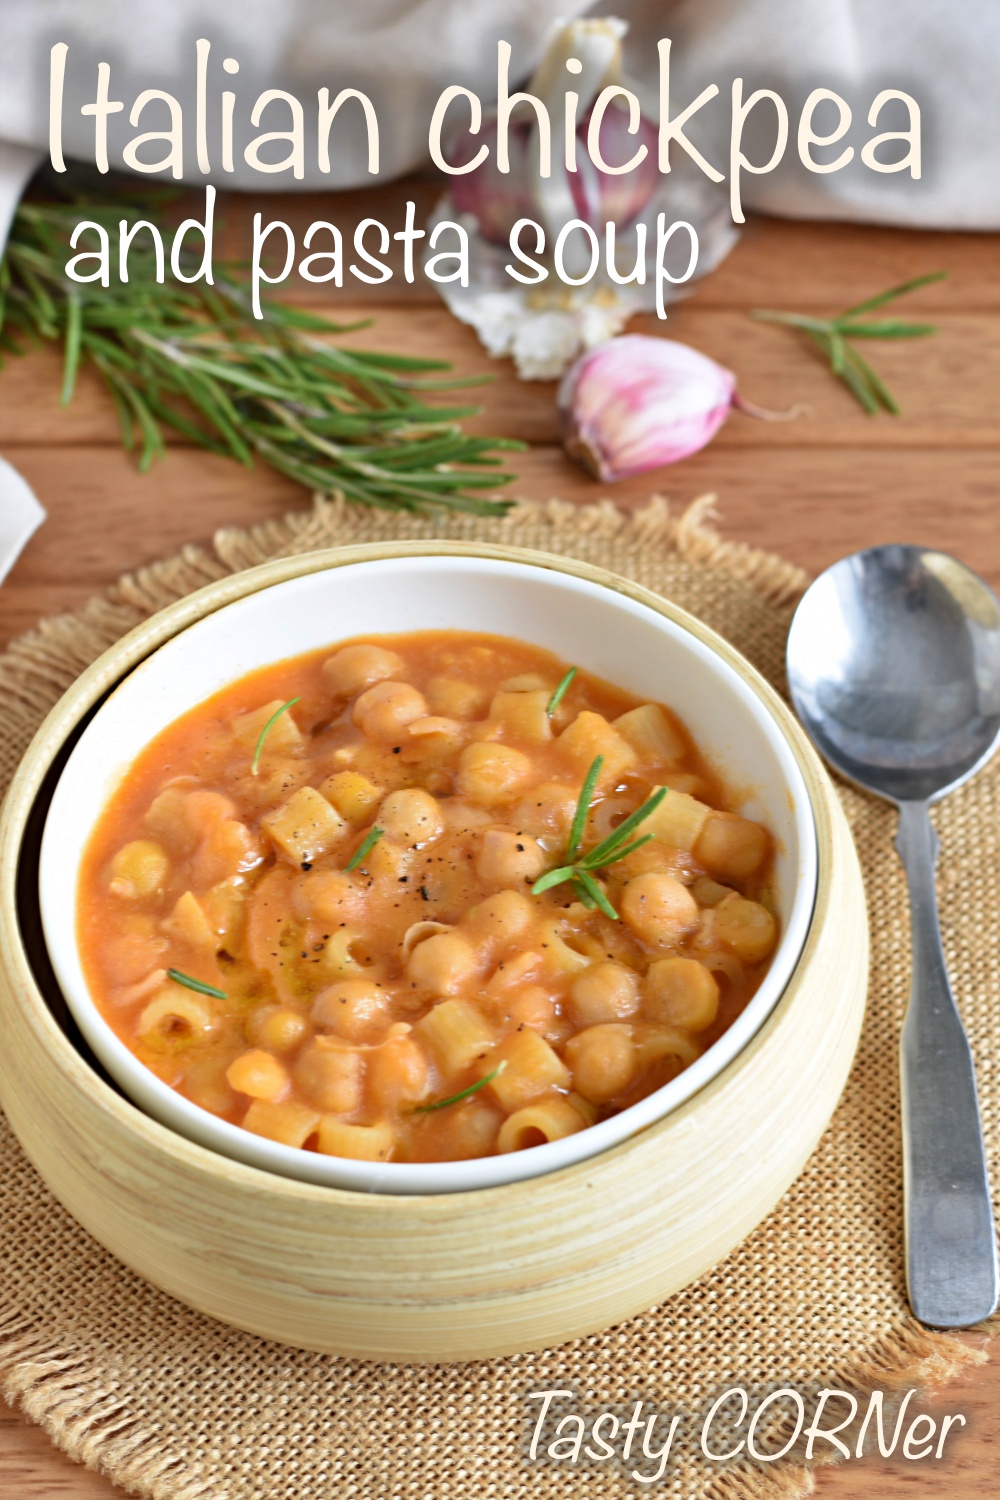 en_v_ italian chickpea and pasta soup authentic classic recipe stick and creamy by tatsycorner